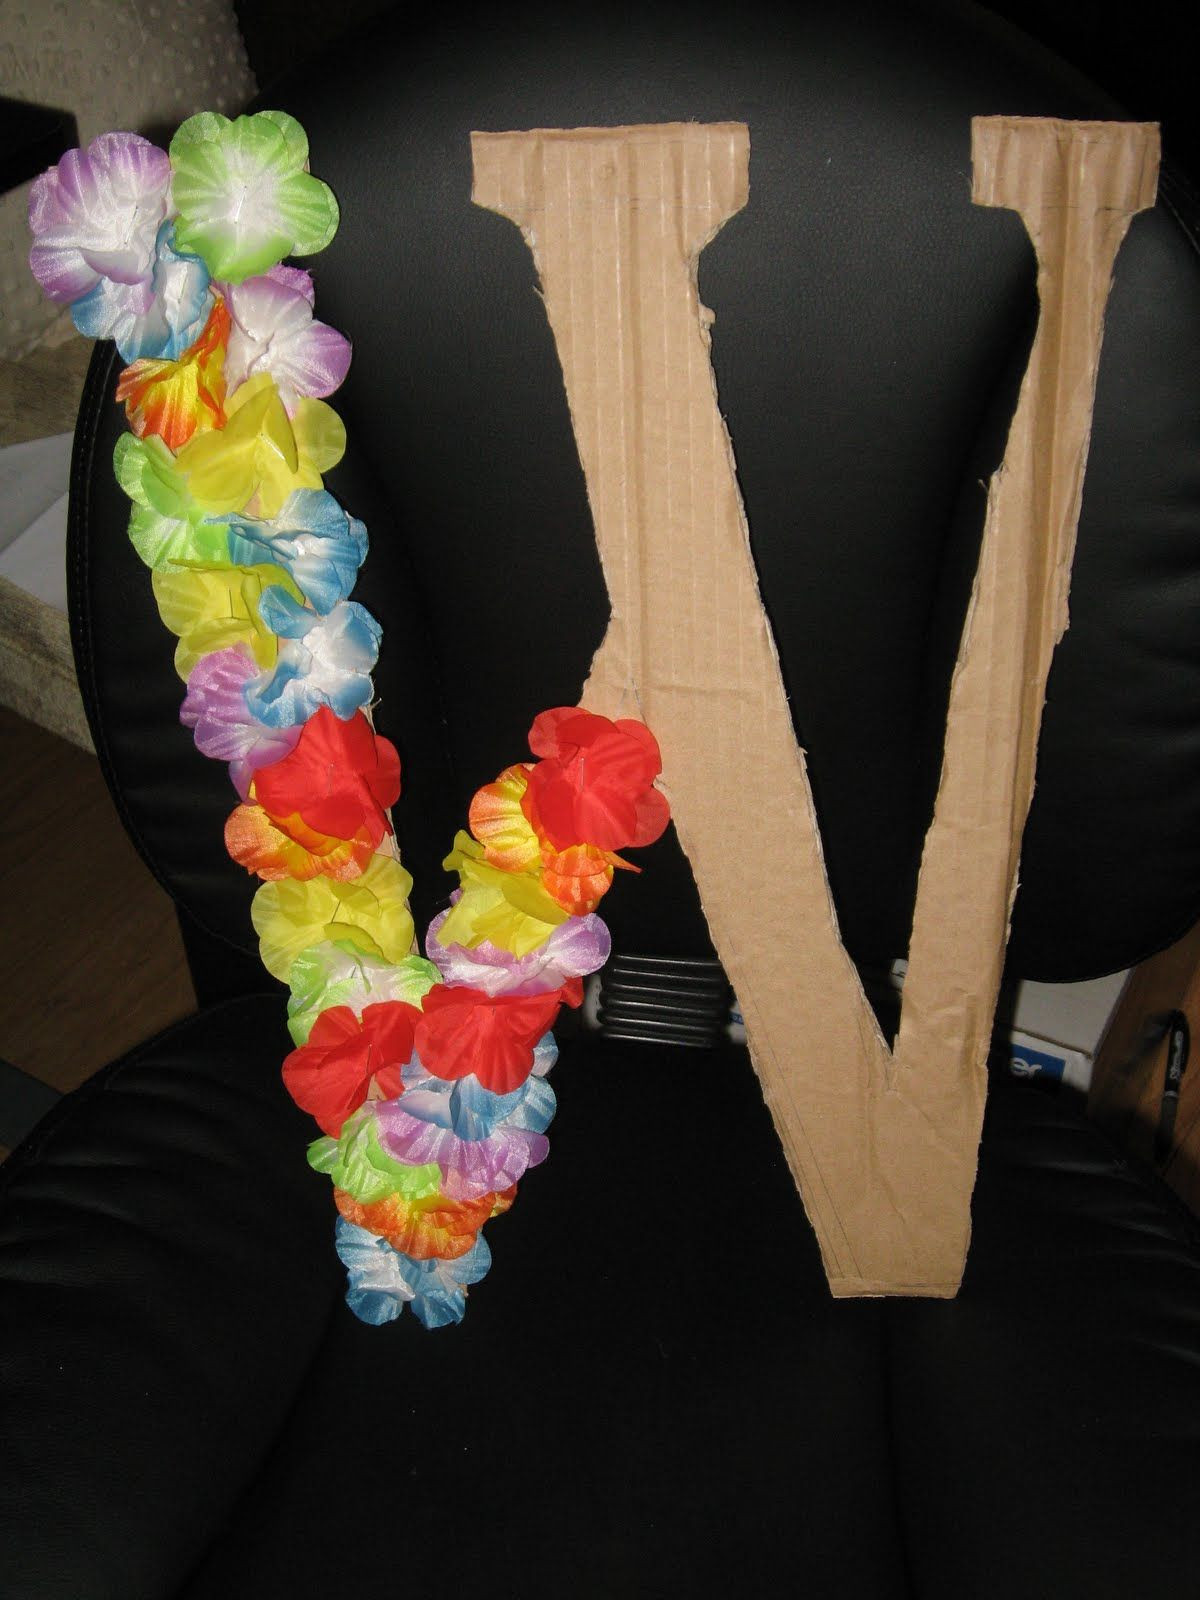 22 Of the Best Ideas for Diy Hawaiian Party Decorations  Home, Family